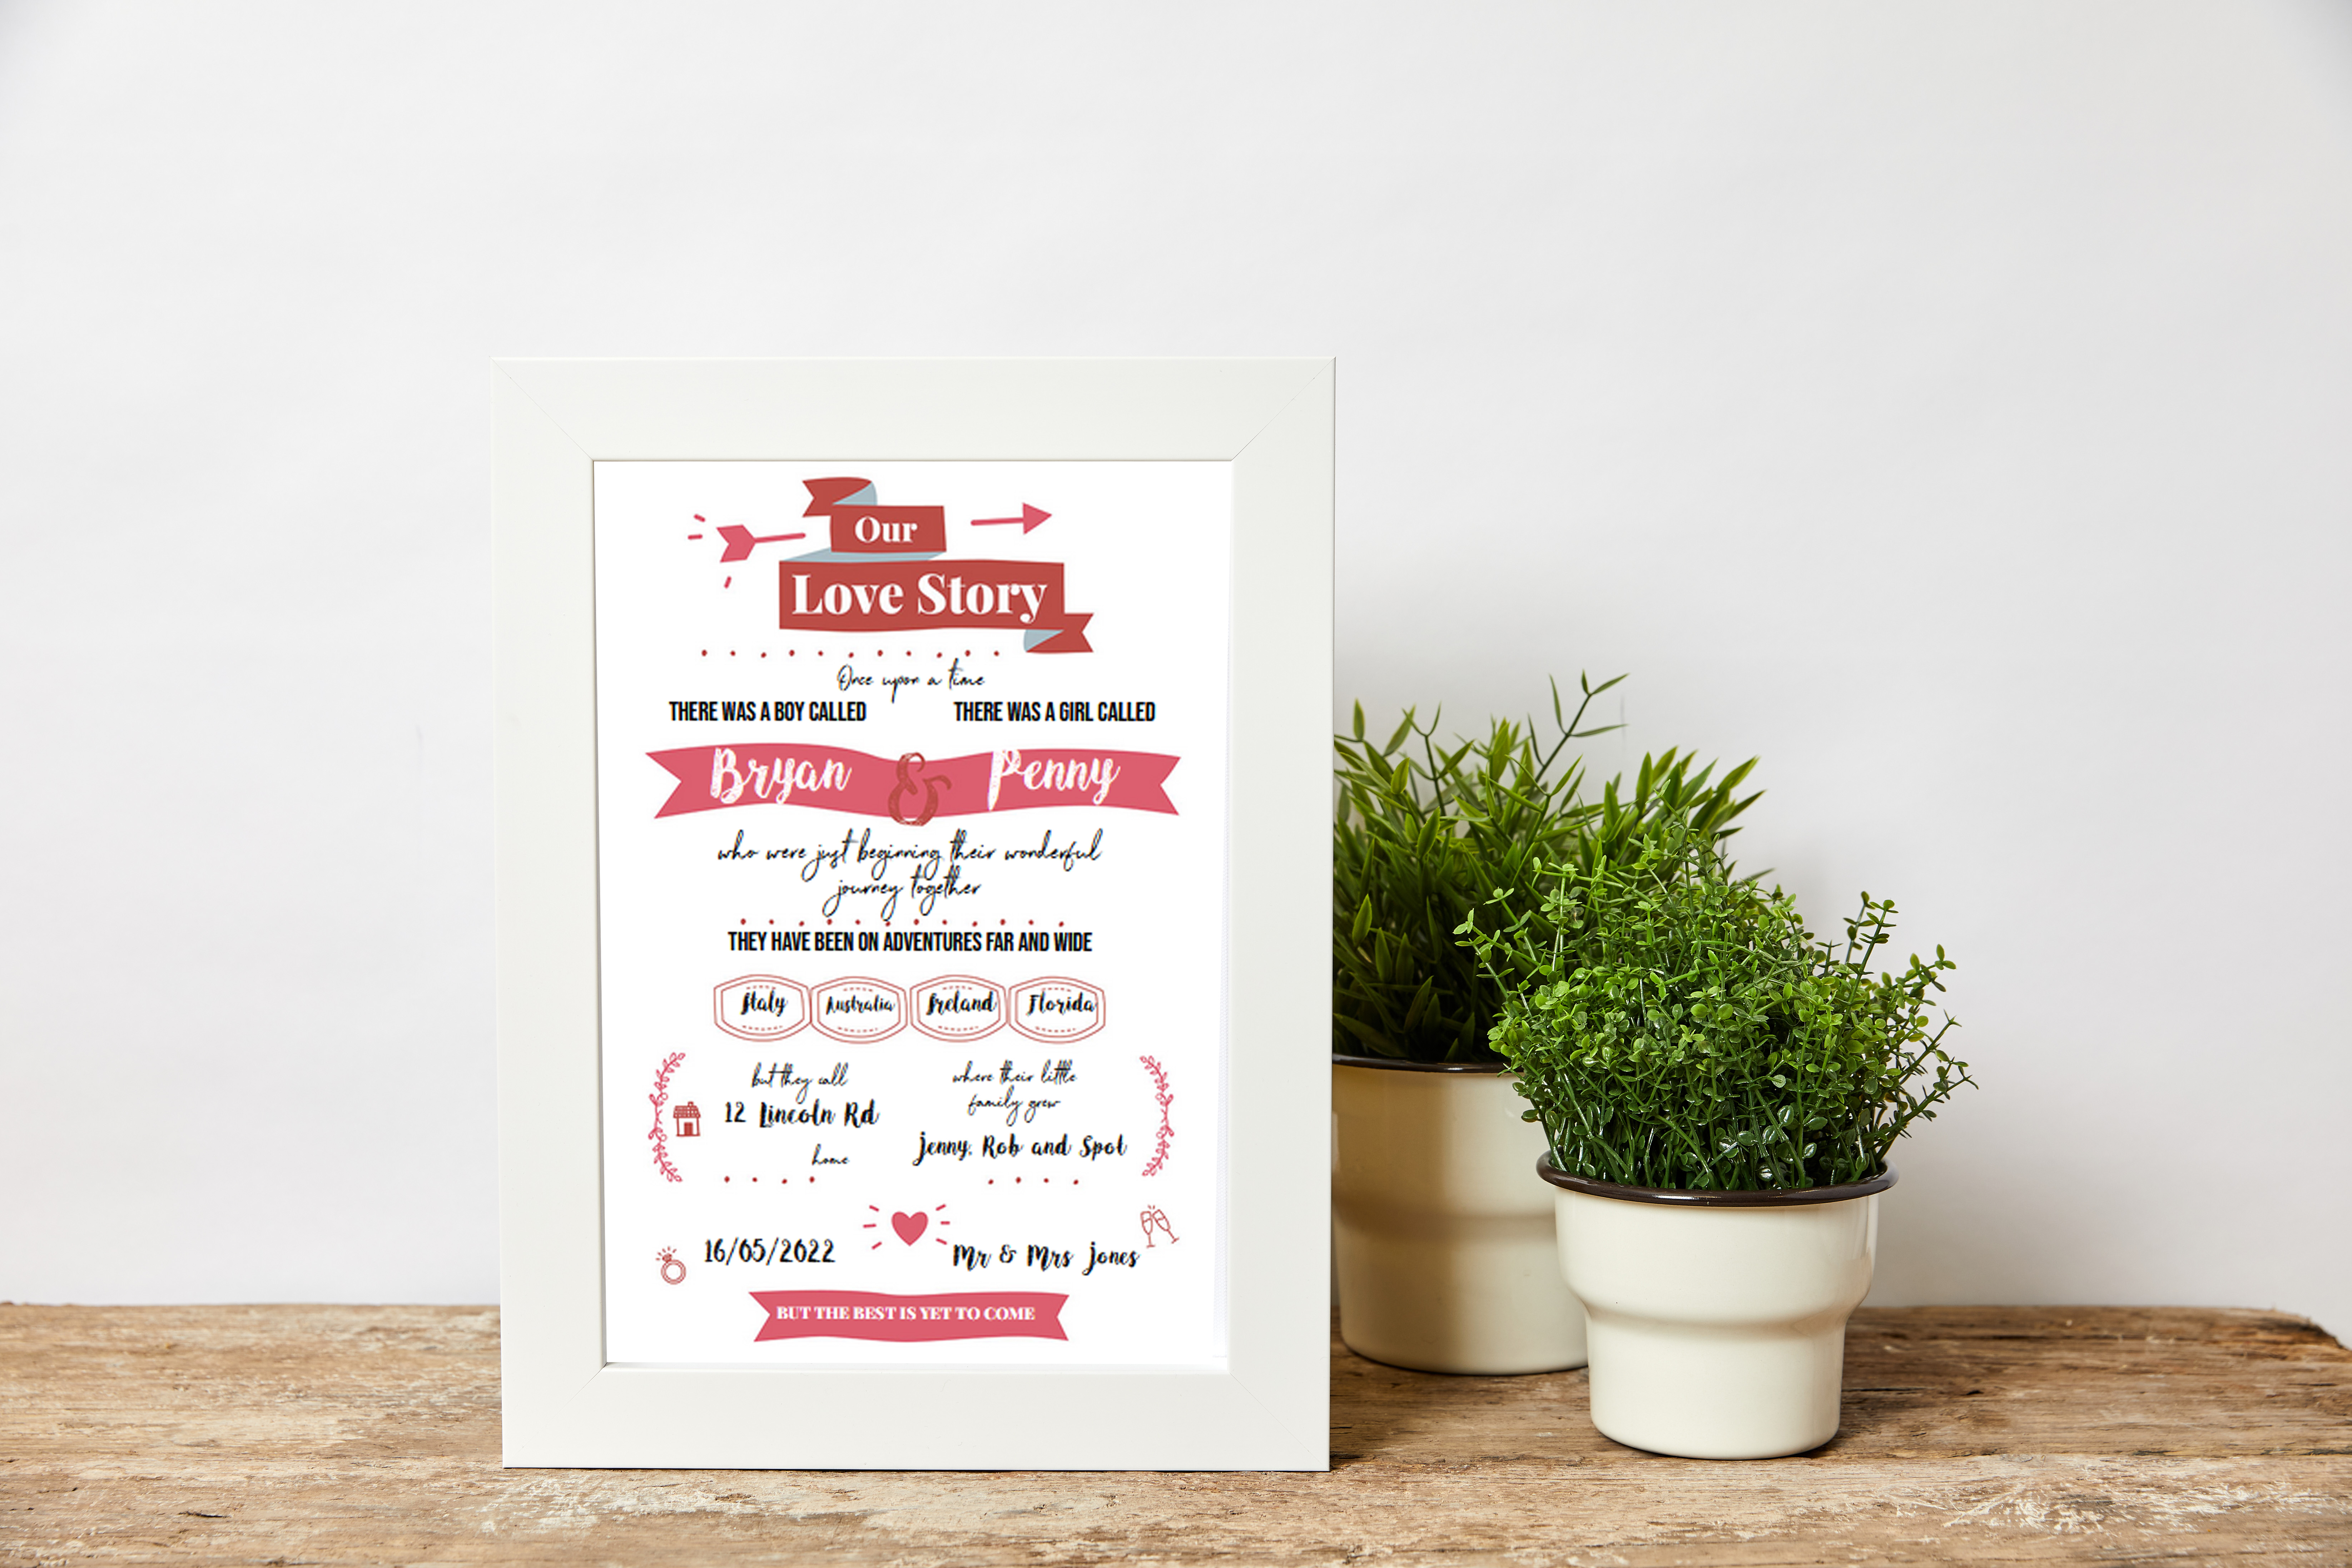 Create your own personalised love story and print onto canvas, poster or frame your story and choose from a range of colour themes to create the perfect anniversary, wedding, birthday or valentines gift for your partner